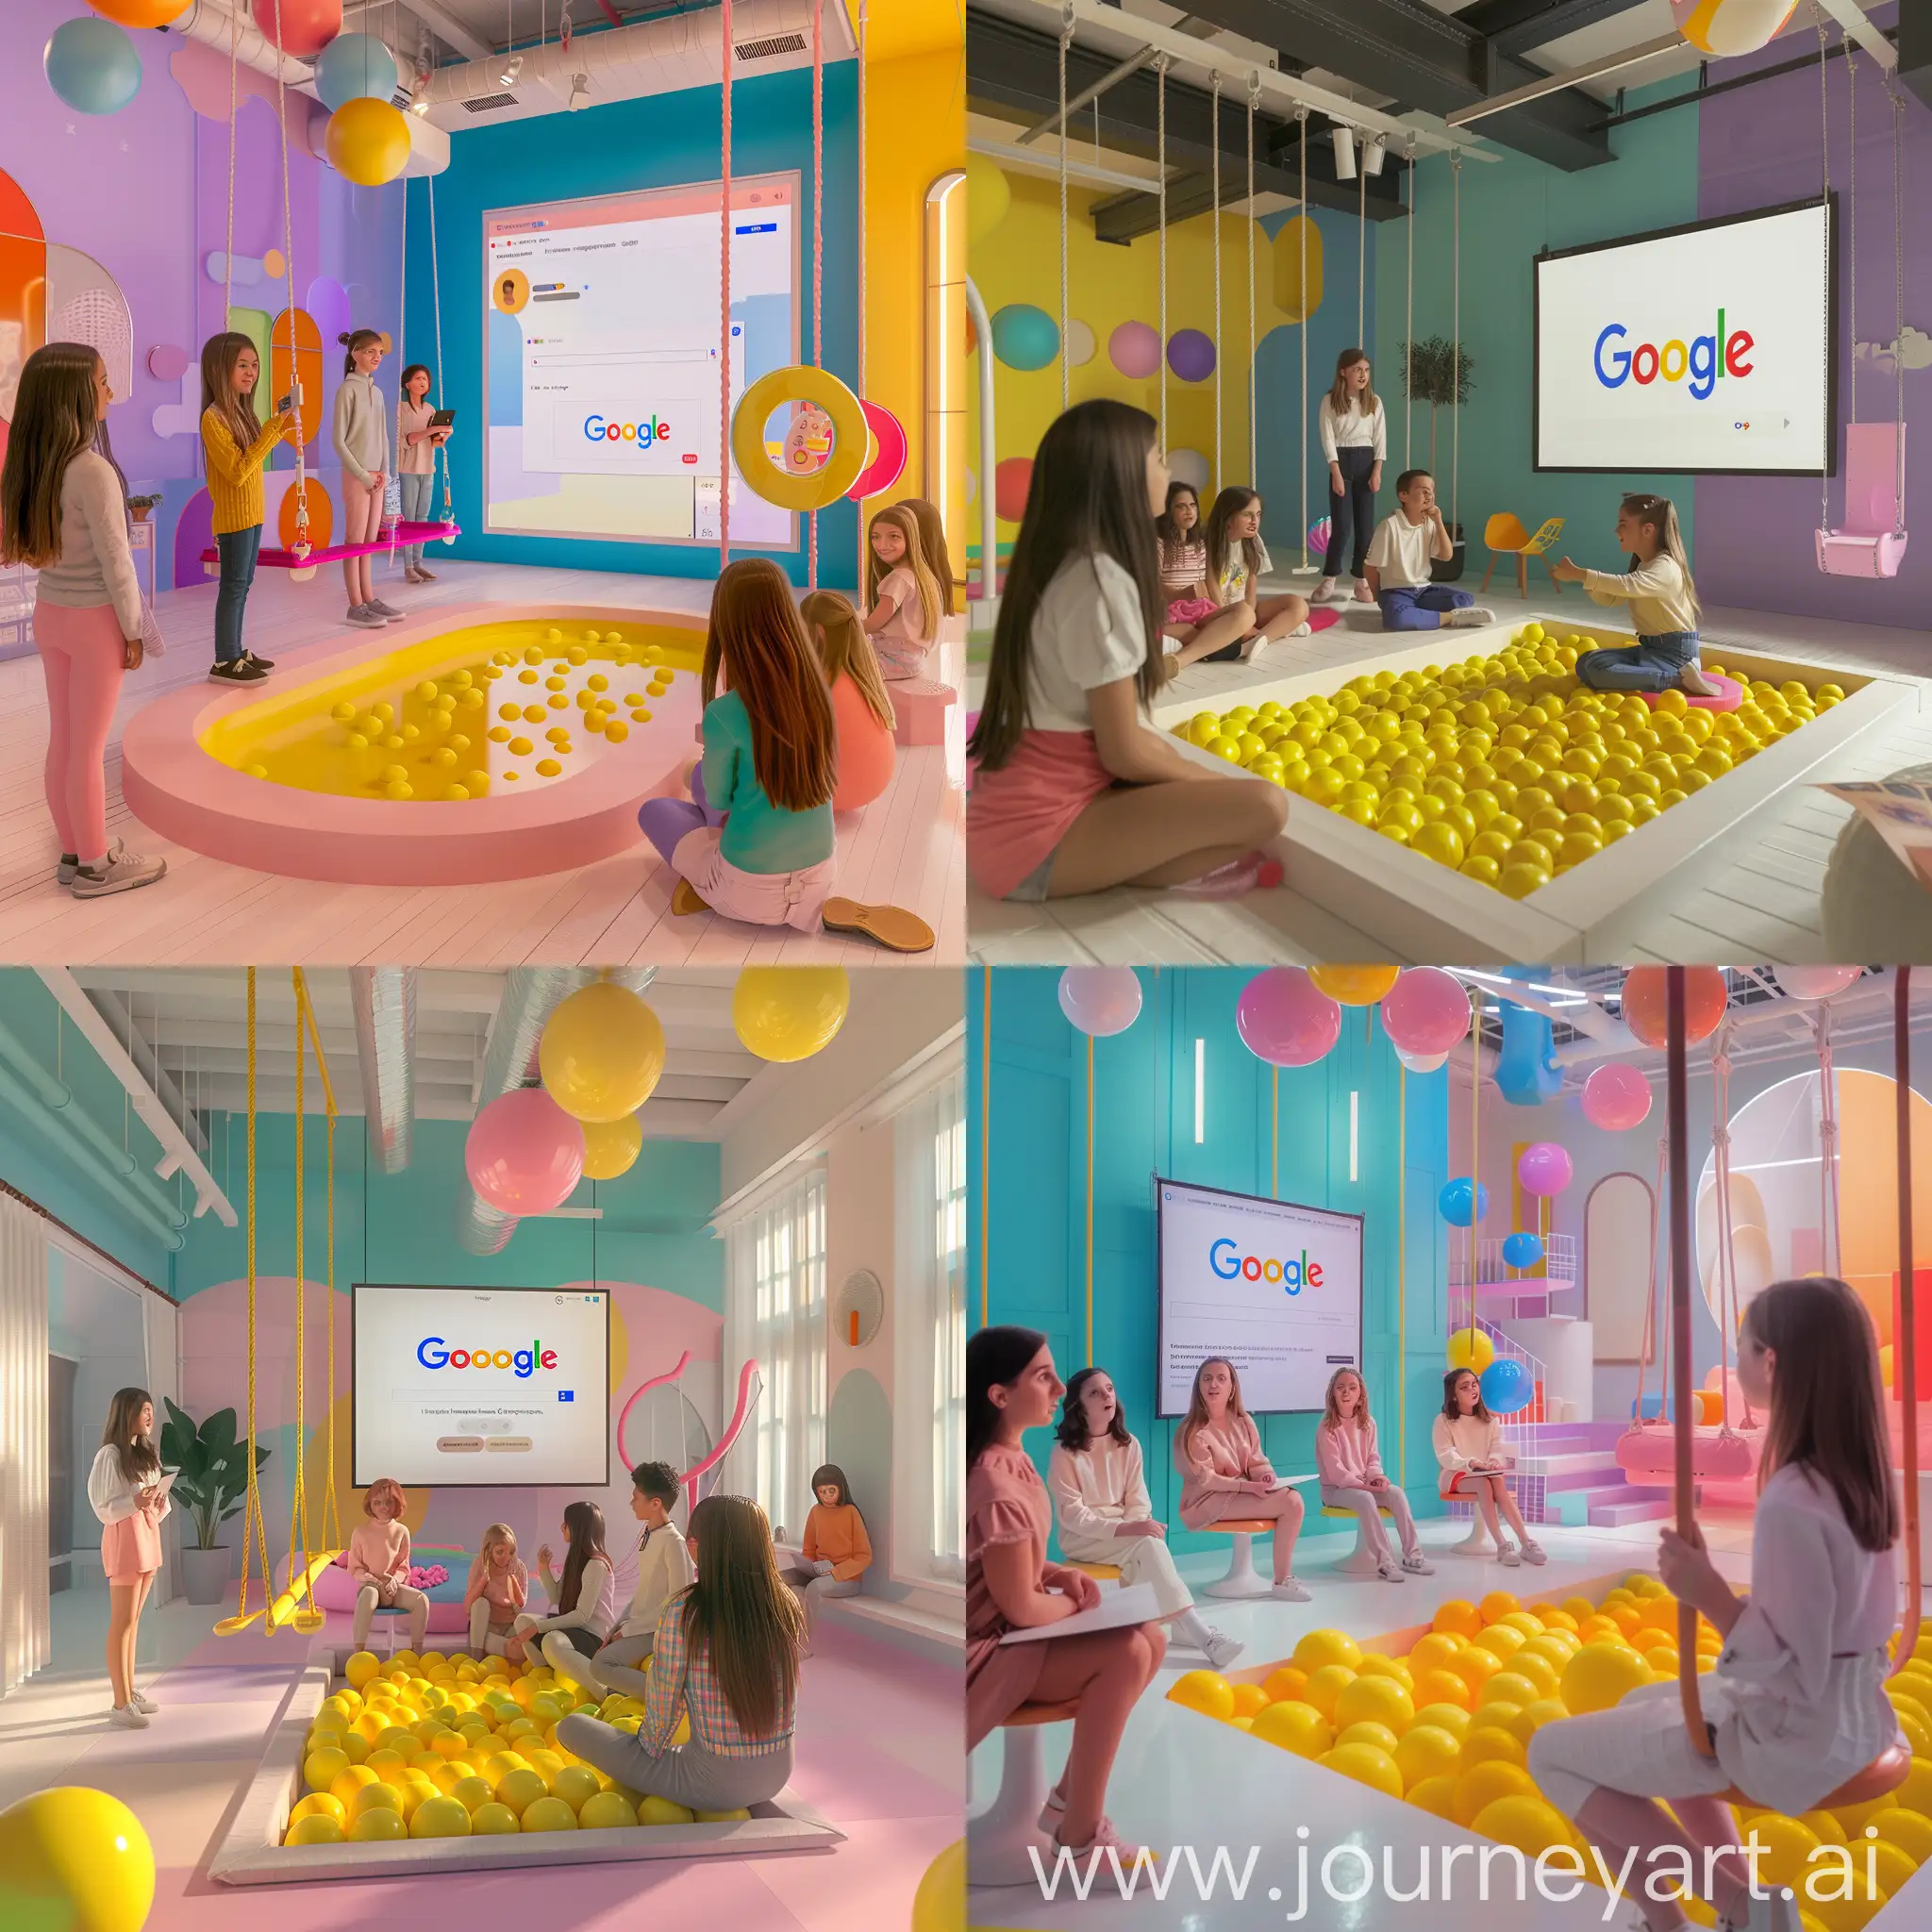 a meeting in a colourful room (google style, with a pool of yellow balls, a pink swing...). There are 4 girls and 2 boys in the meeting. They are about to start a simulation of a new website platform. One of the girls is presenting the simulation, the others are sitting and learning from her.